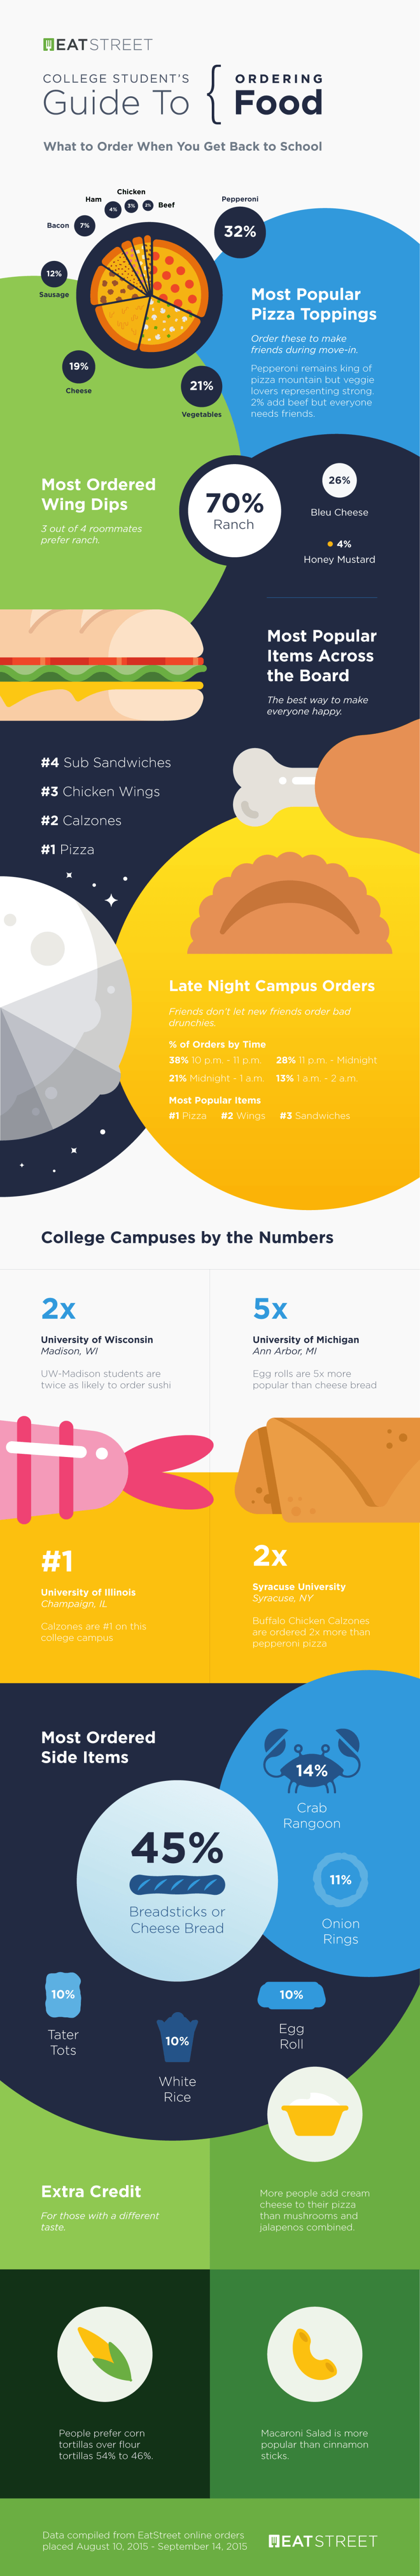 Back-to-College Food Ordering Habits Infographic